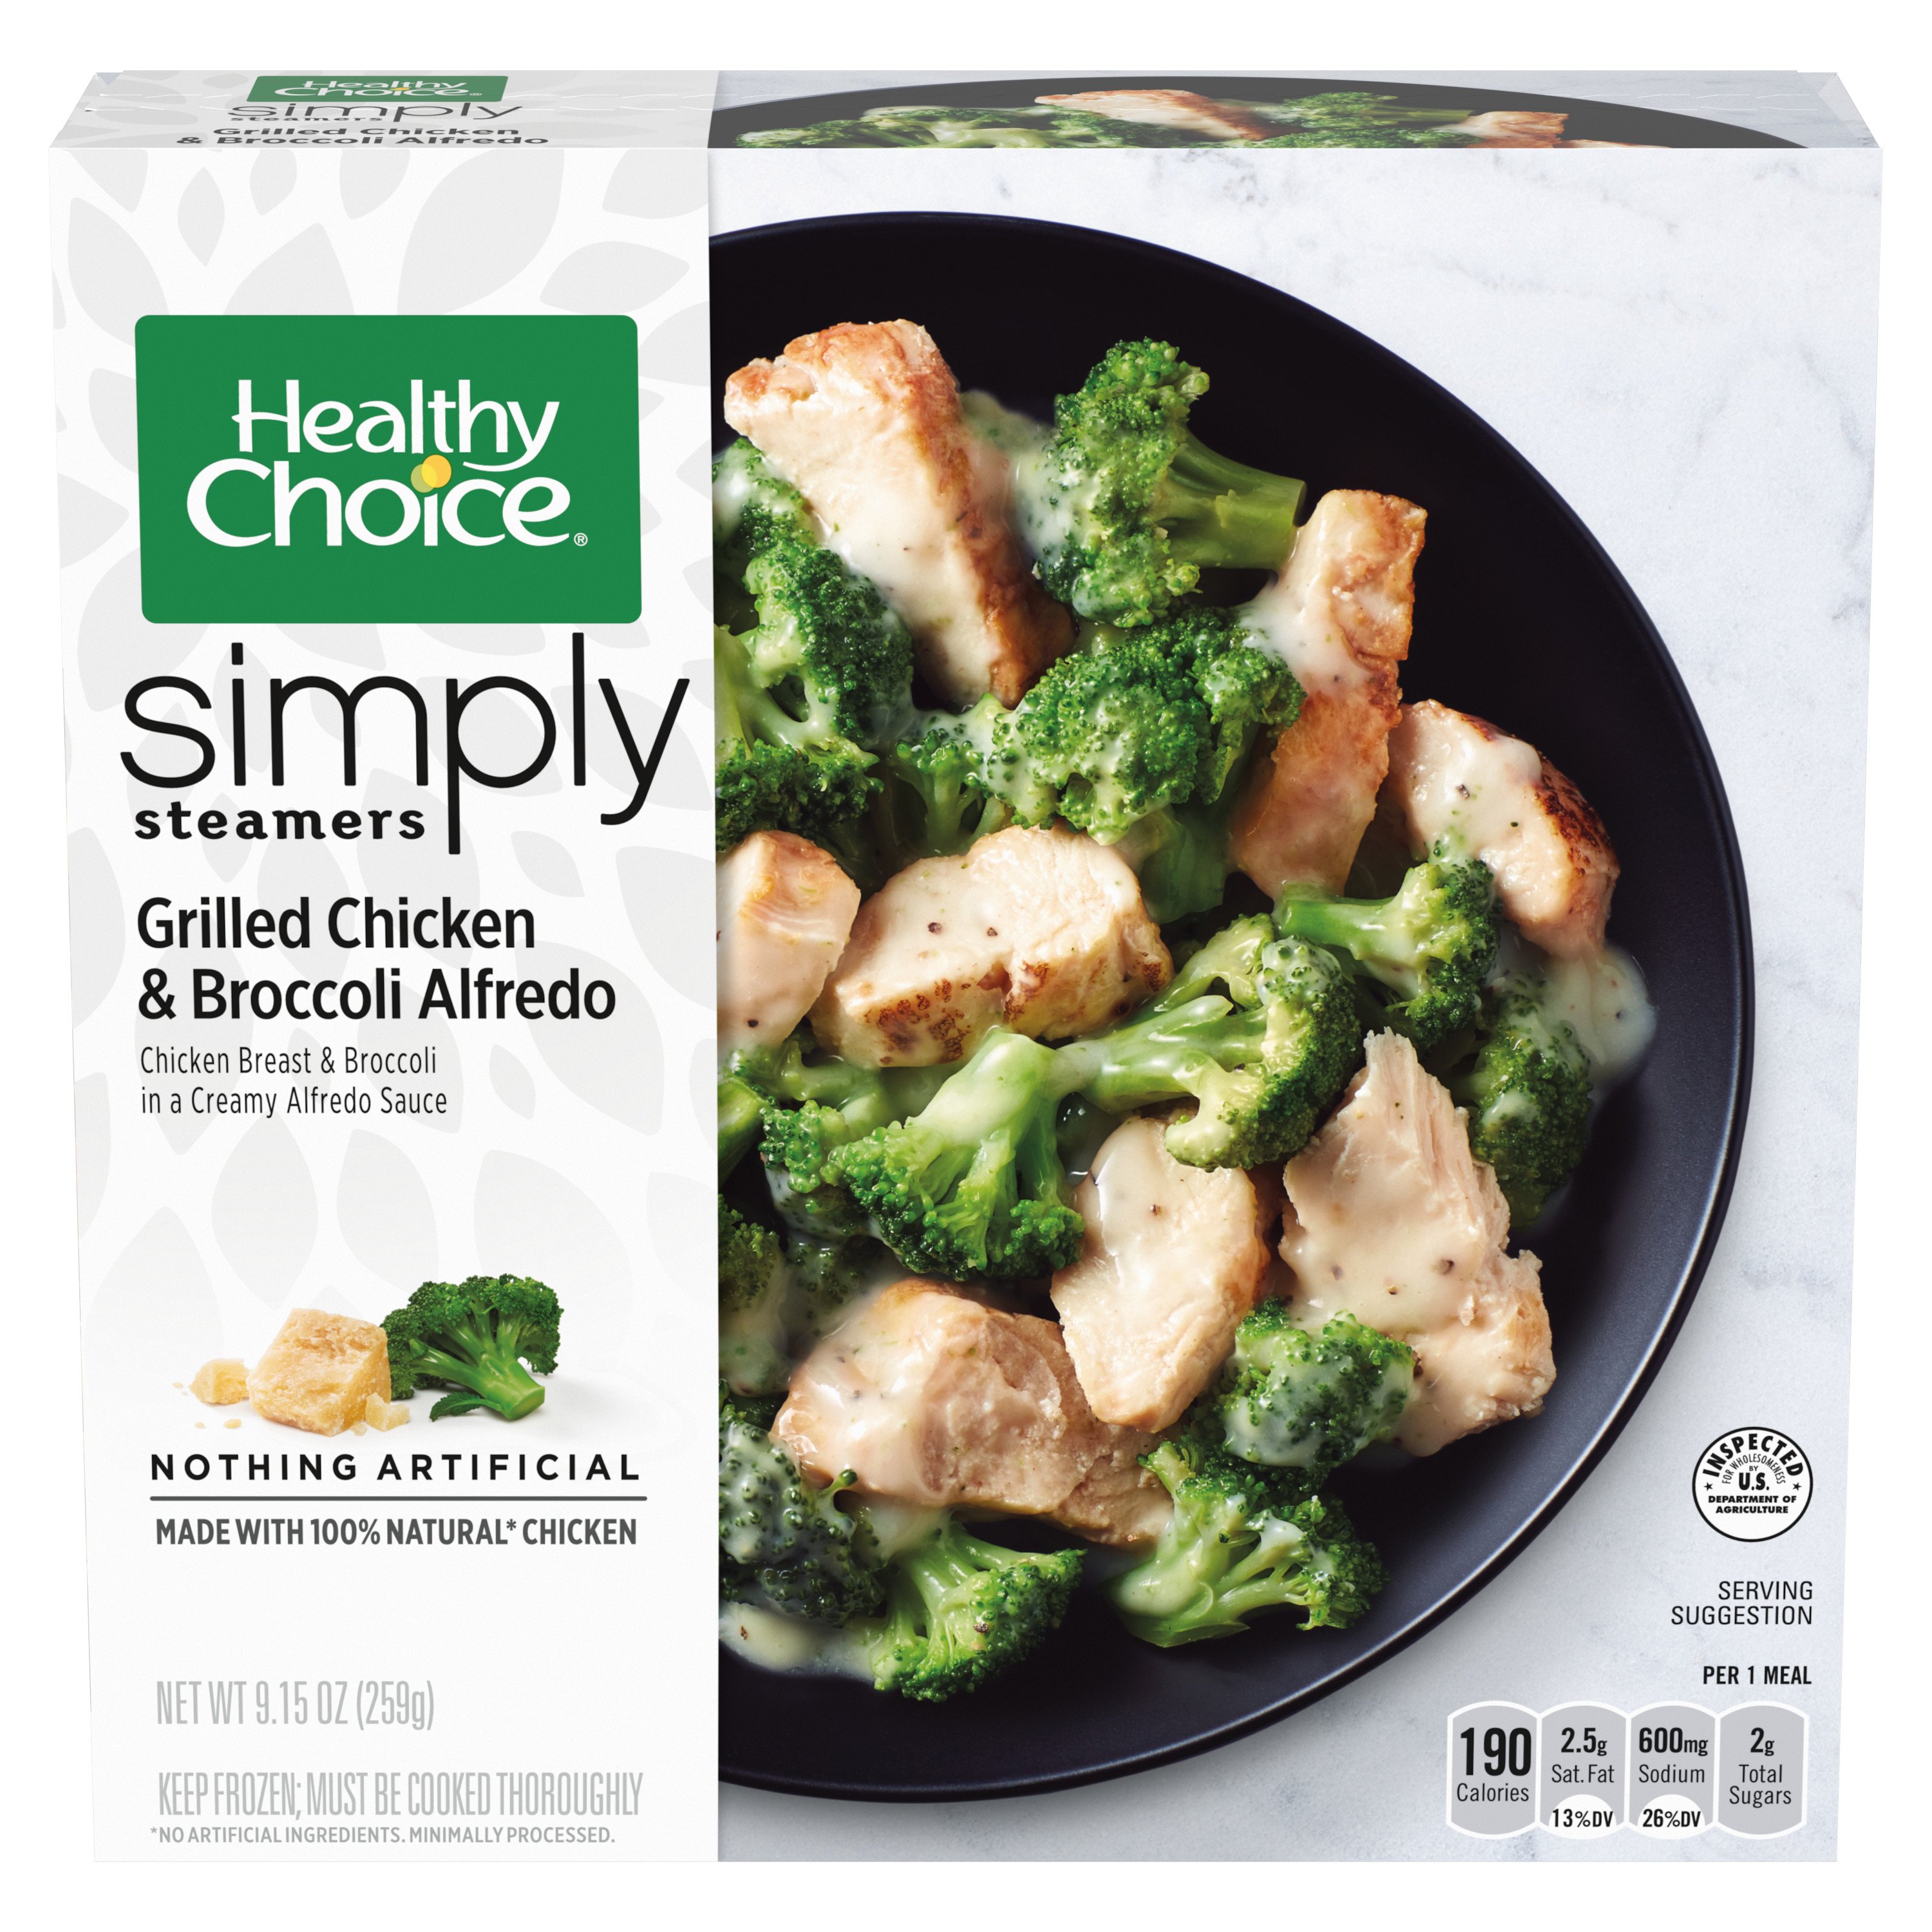 Healthy Choice Simply Grilled Chicken Broccoli Alfredo Shop Entrees Sides At H E B